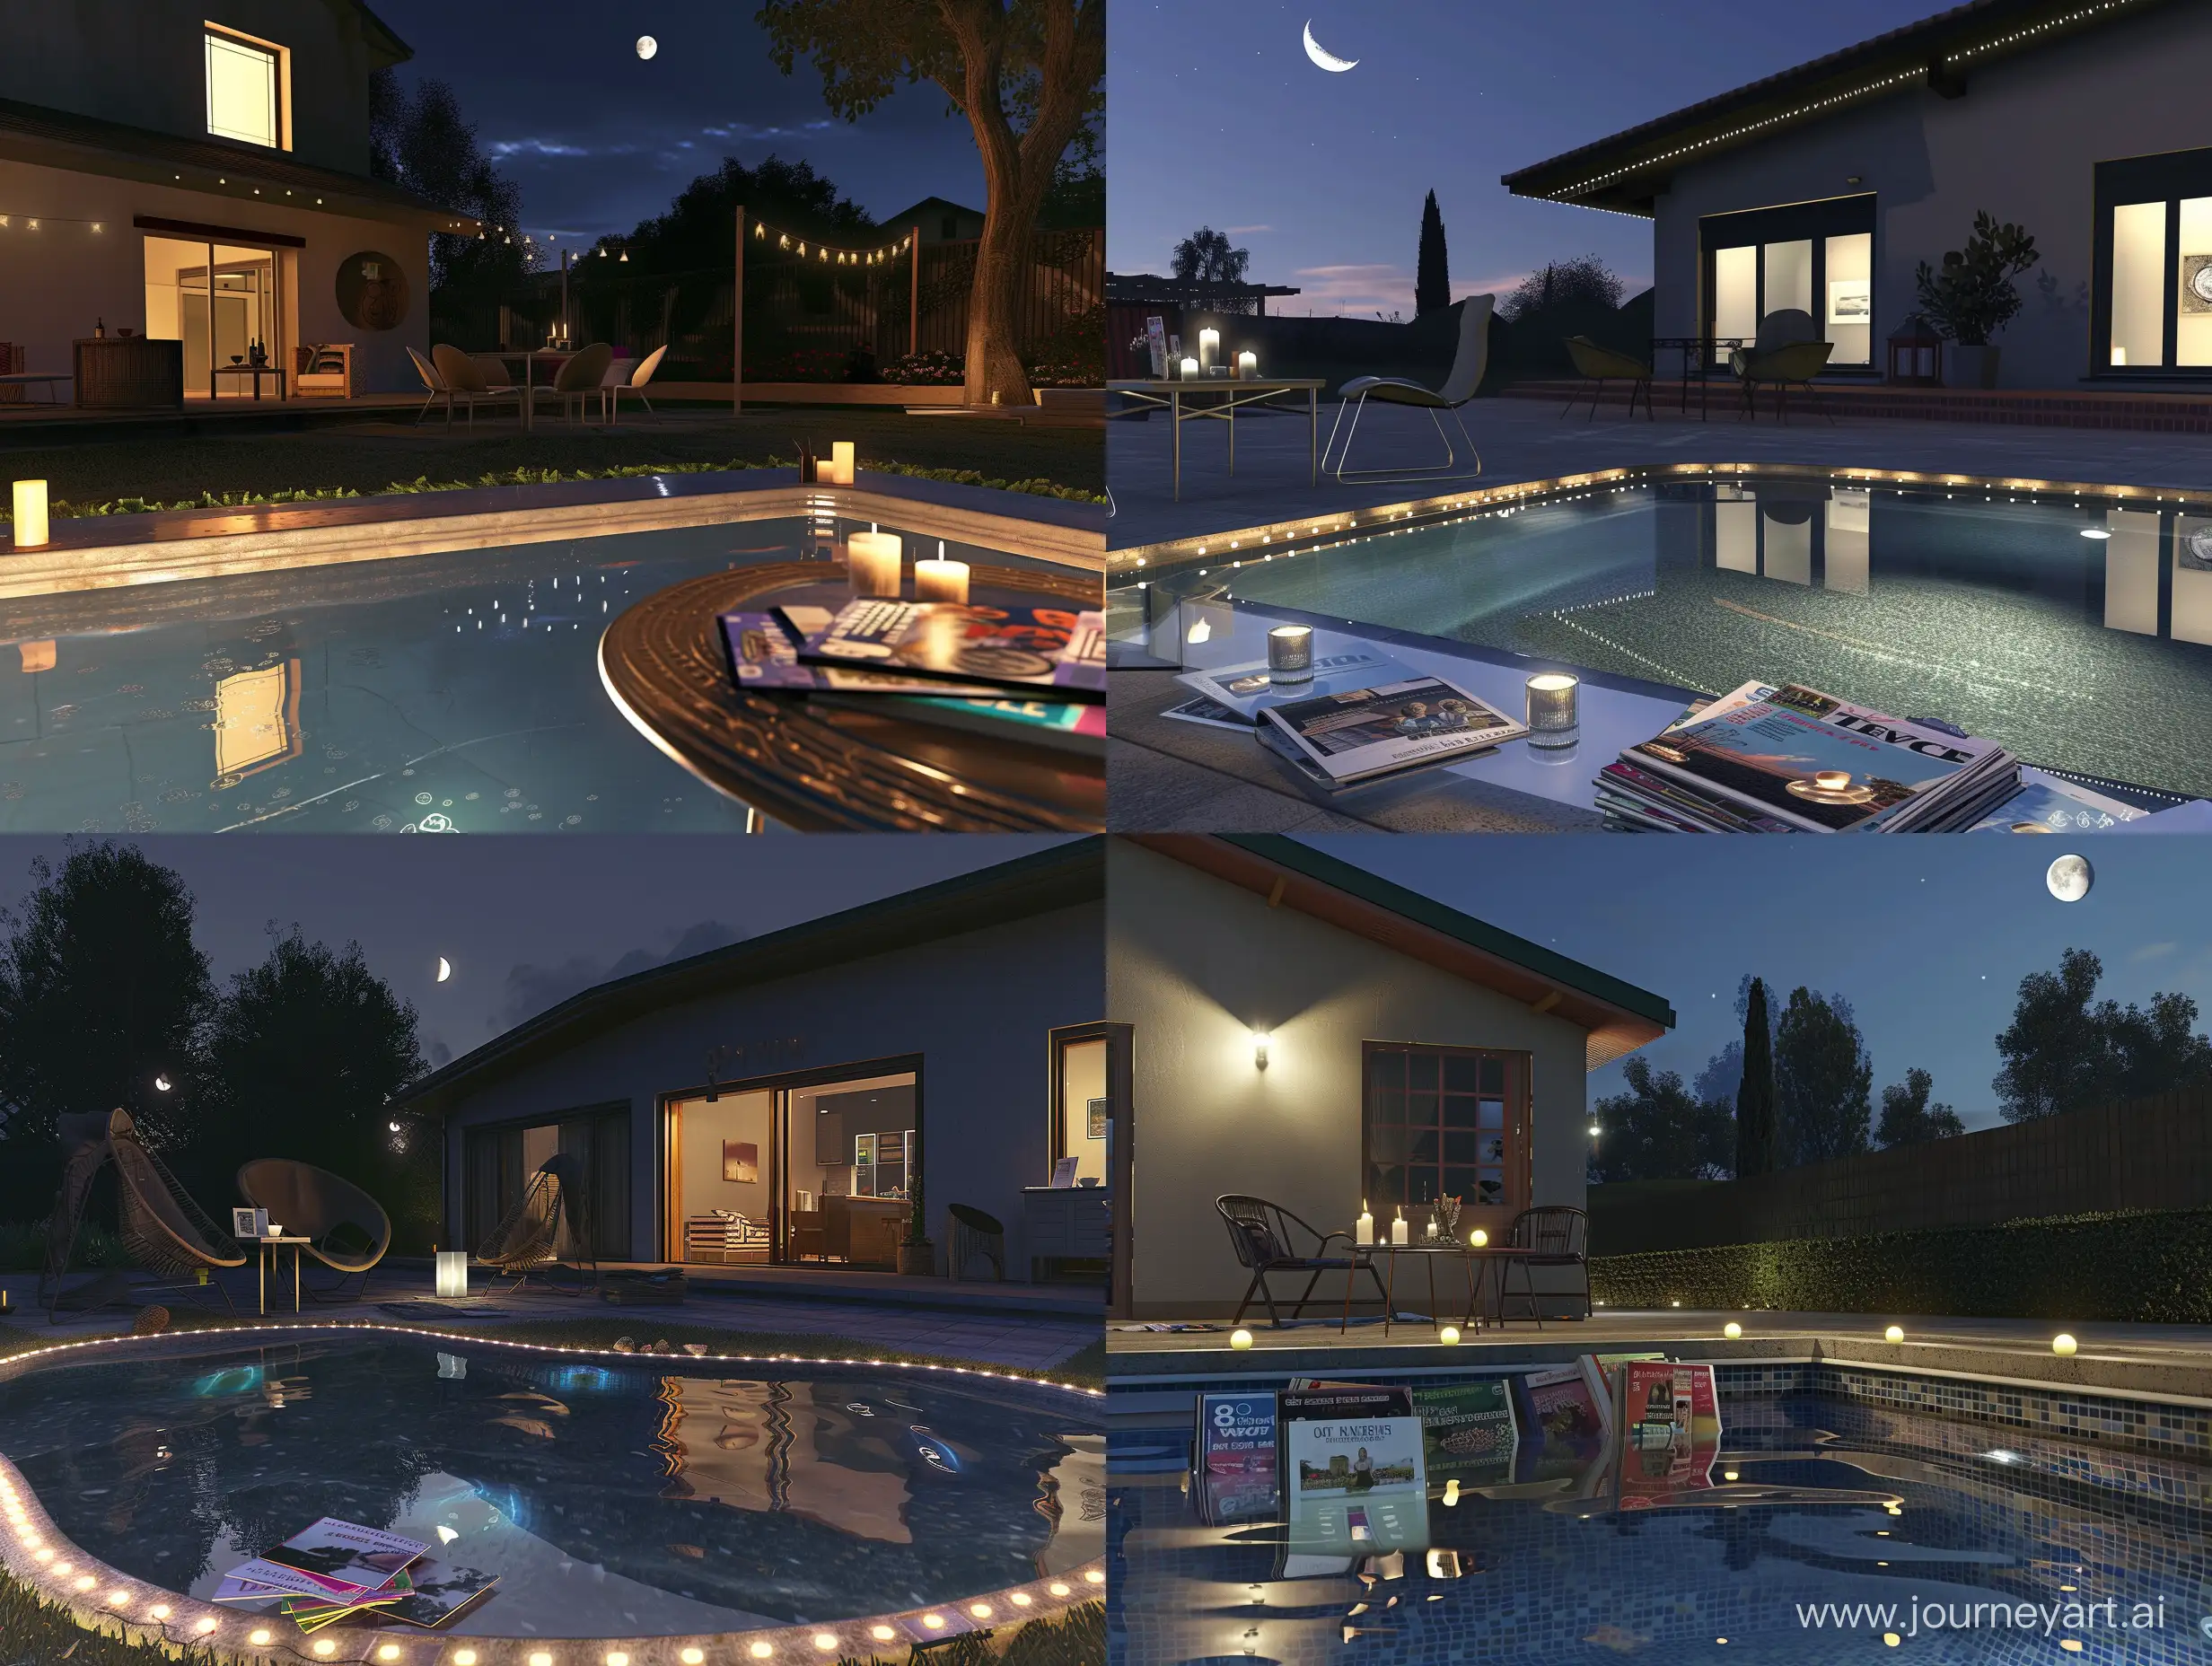 beautiful american house at night. a backyard a small swimming pool, with beautiful edging, desighned lights reflecting in the transparent water. near is a little table with magazines and candles. there are two design chairs near the table. 8 to ultrarealism, unreal engine, clear objects, beautiful nihgt skies with moon 